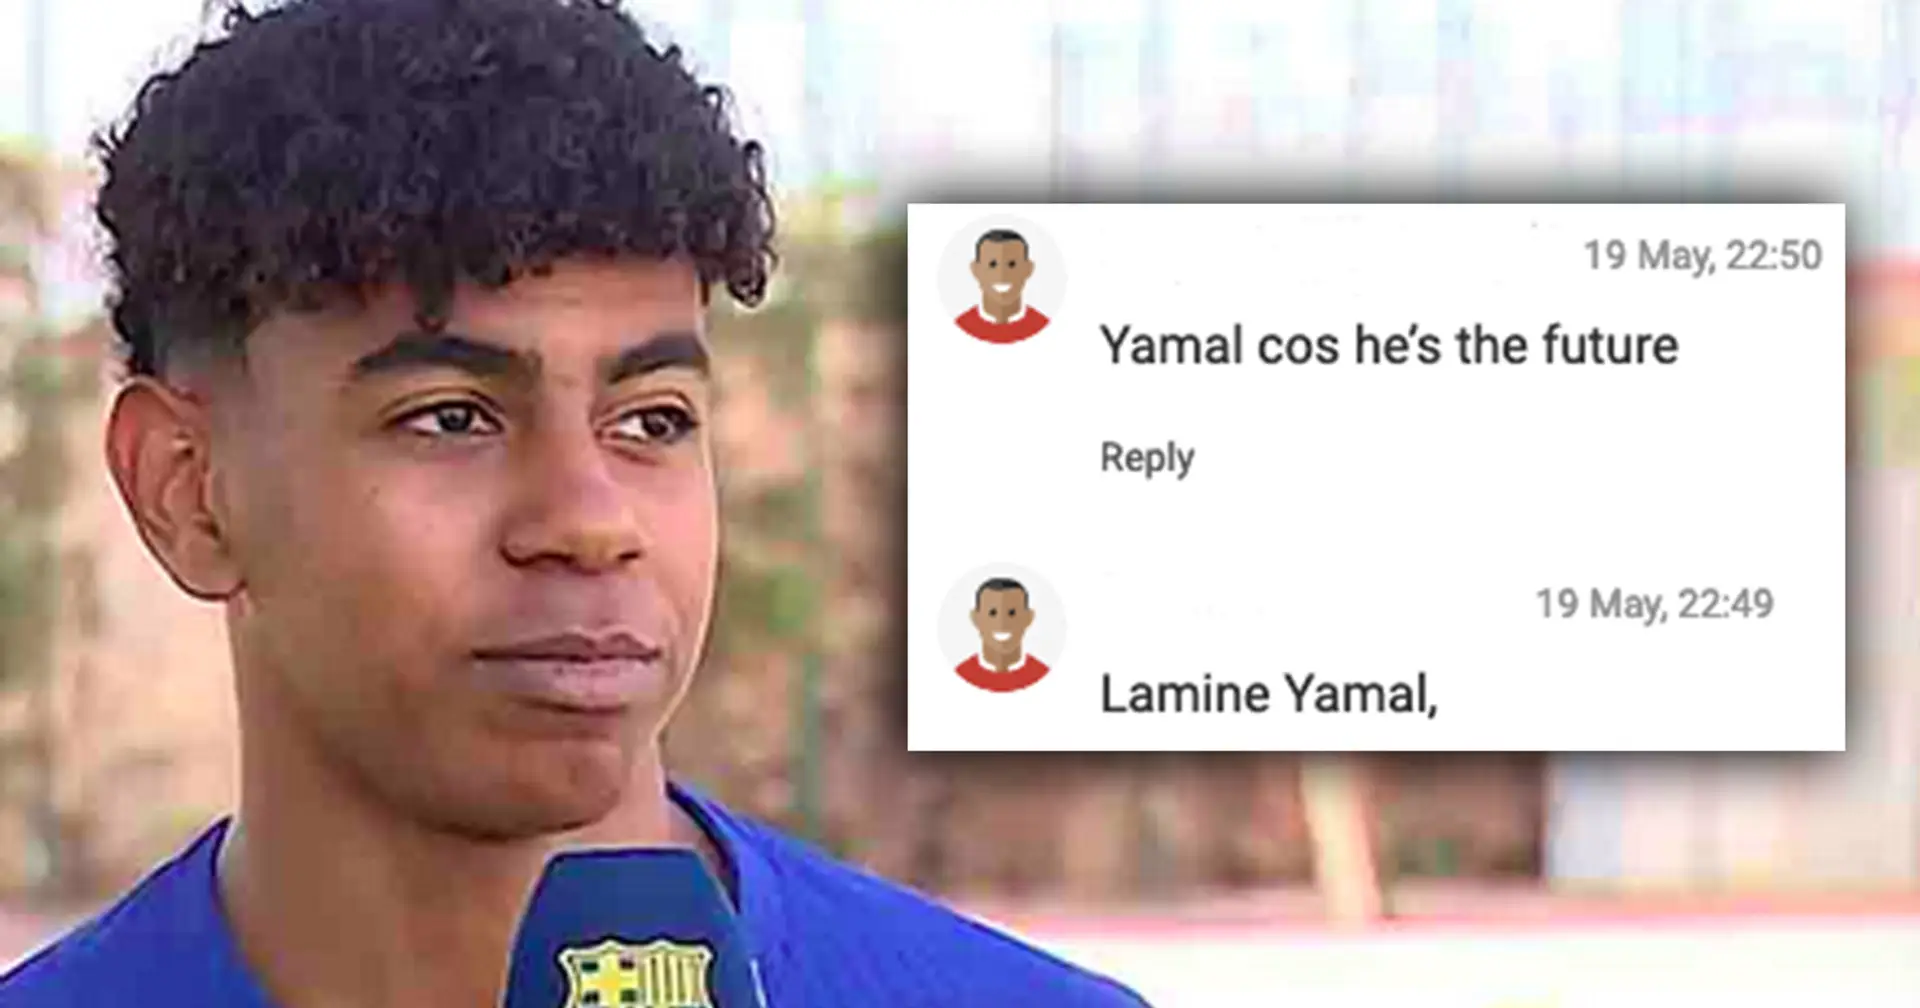 Explained: Why Lamine Yamal can't play v Real Sociedad despite Cules wanting him to do so